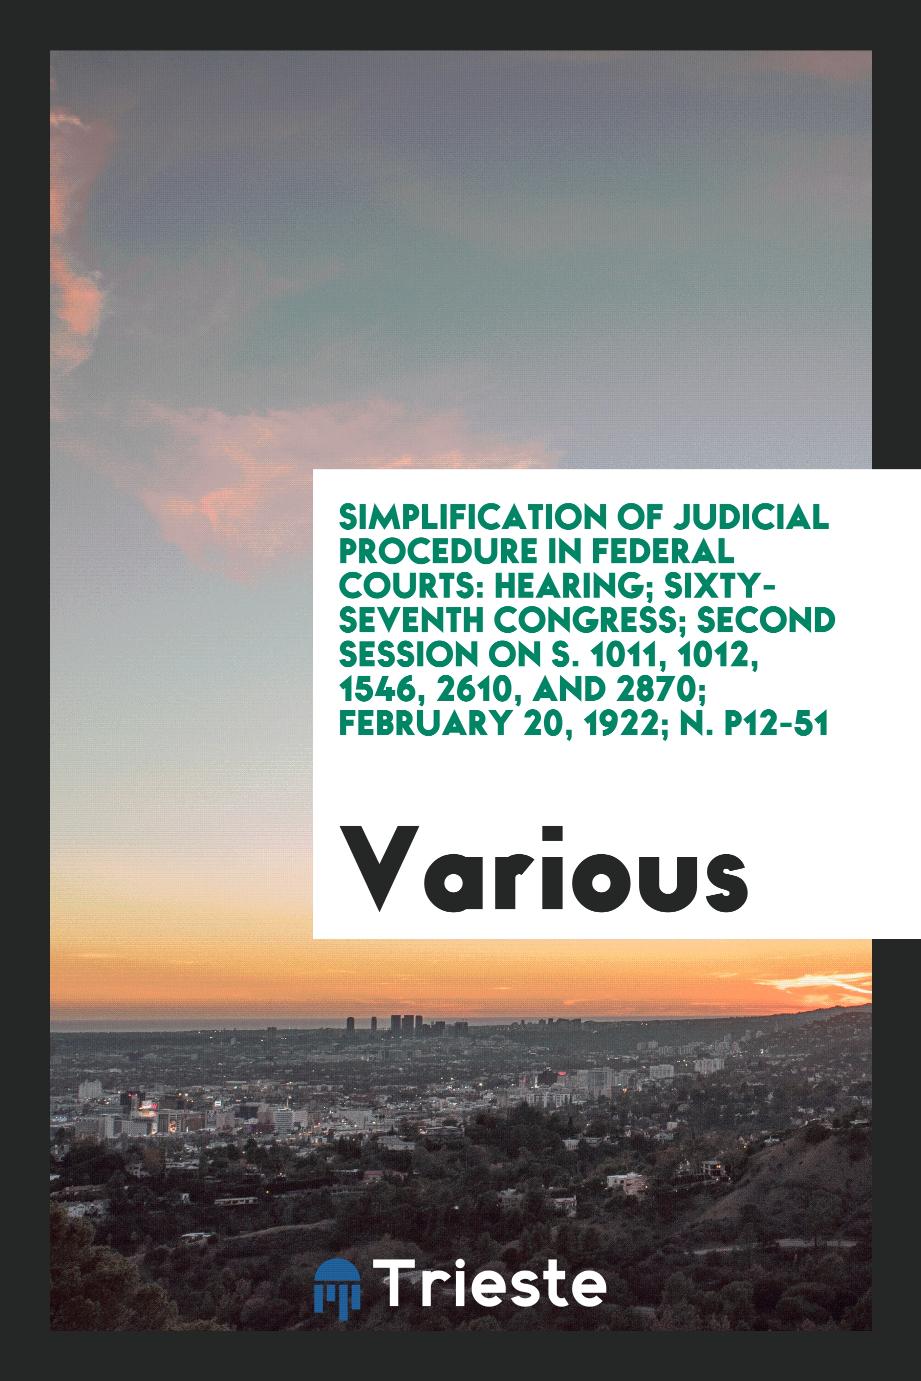 Simplification of judicial procedure in federal courts: hearing; sixty-seventh congress; second session on S. 1011, 1012, 1546, 2610, and 2870; February 20, 1922; N. P12-51